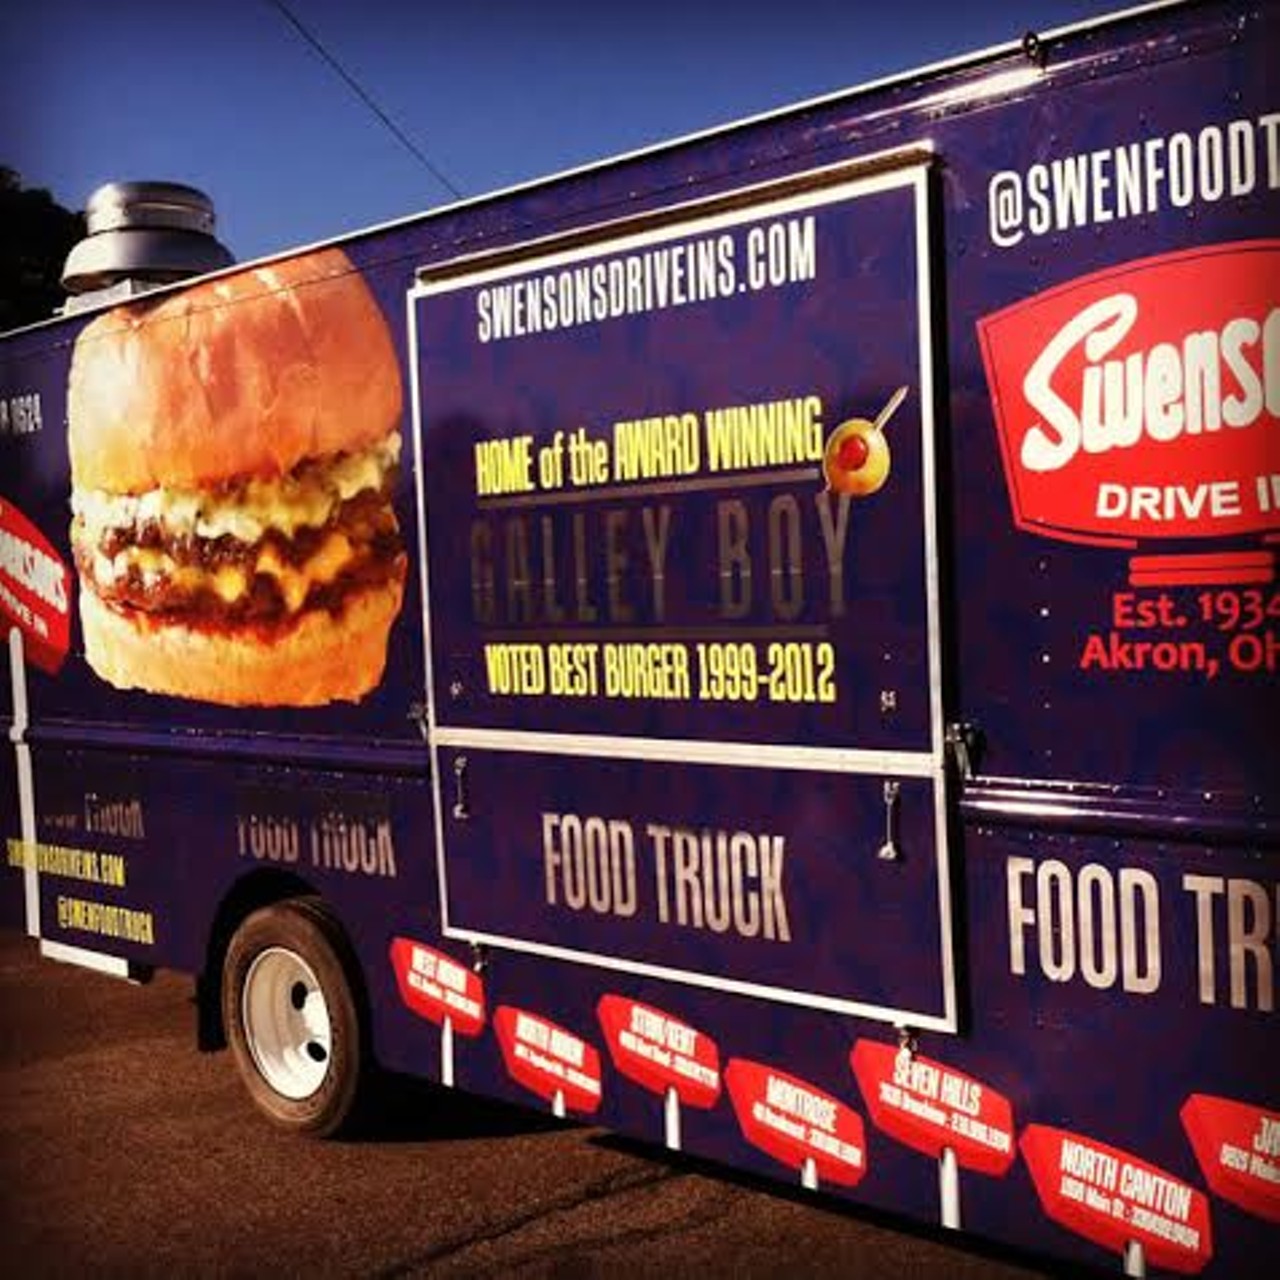 Finally the legendary burger joint is on four wheels. Between private events and festivals, a sighting of this truck is a treasured feat. Keep an eye on their Twitter feed for details on their upcoming whereabouts.